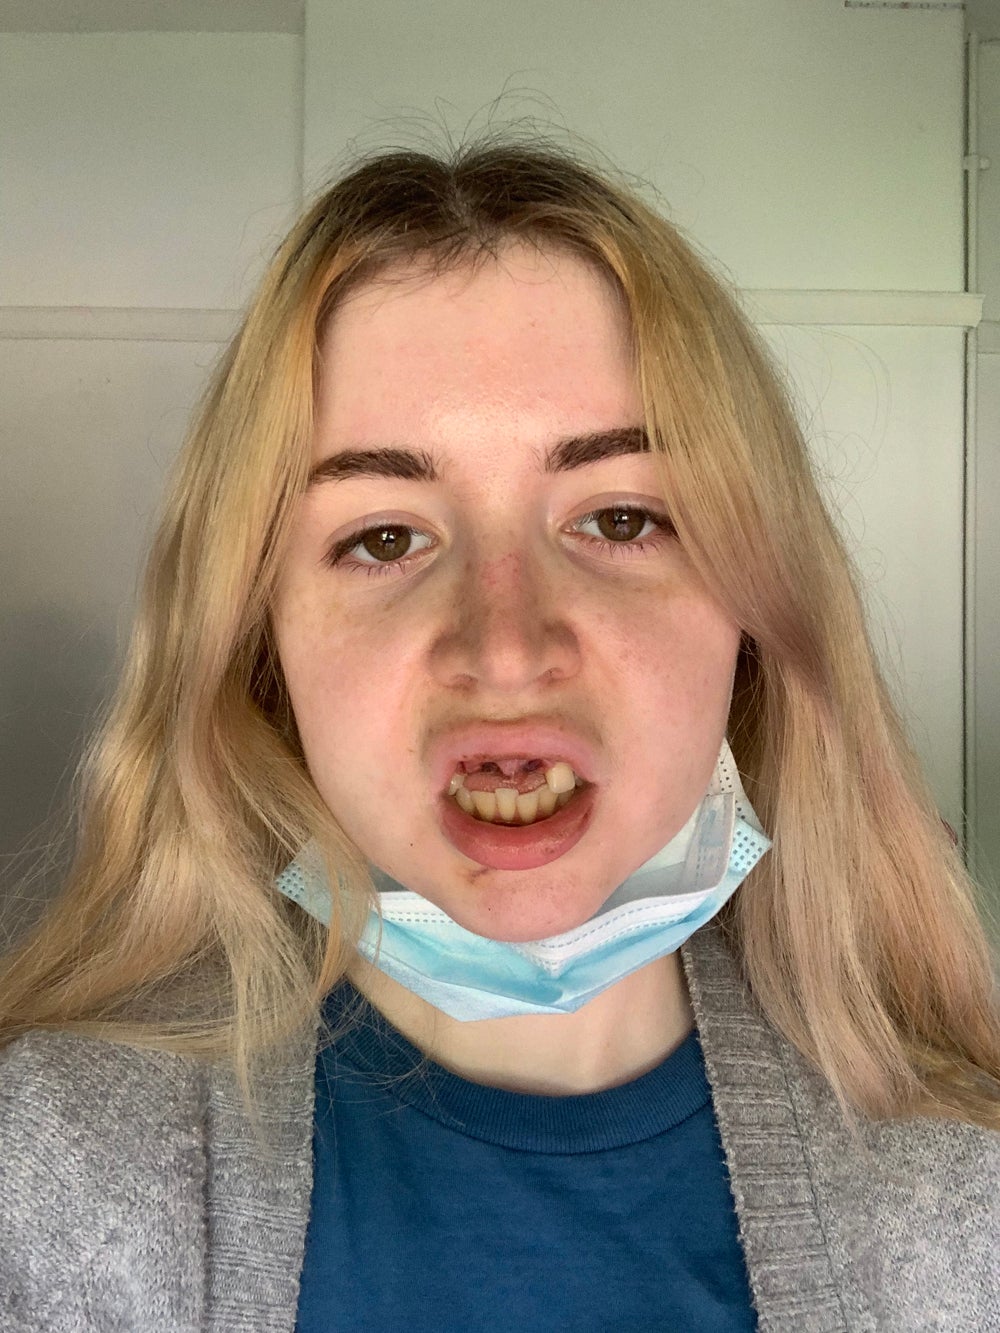 GoFundMe: Gamer begs for help to get £18K implants after losing her teeth  in freak accident